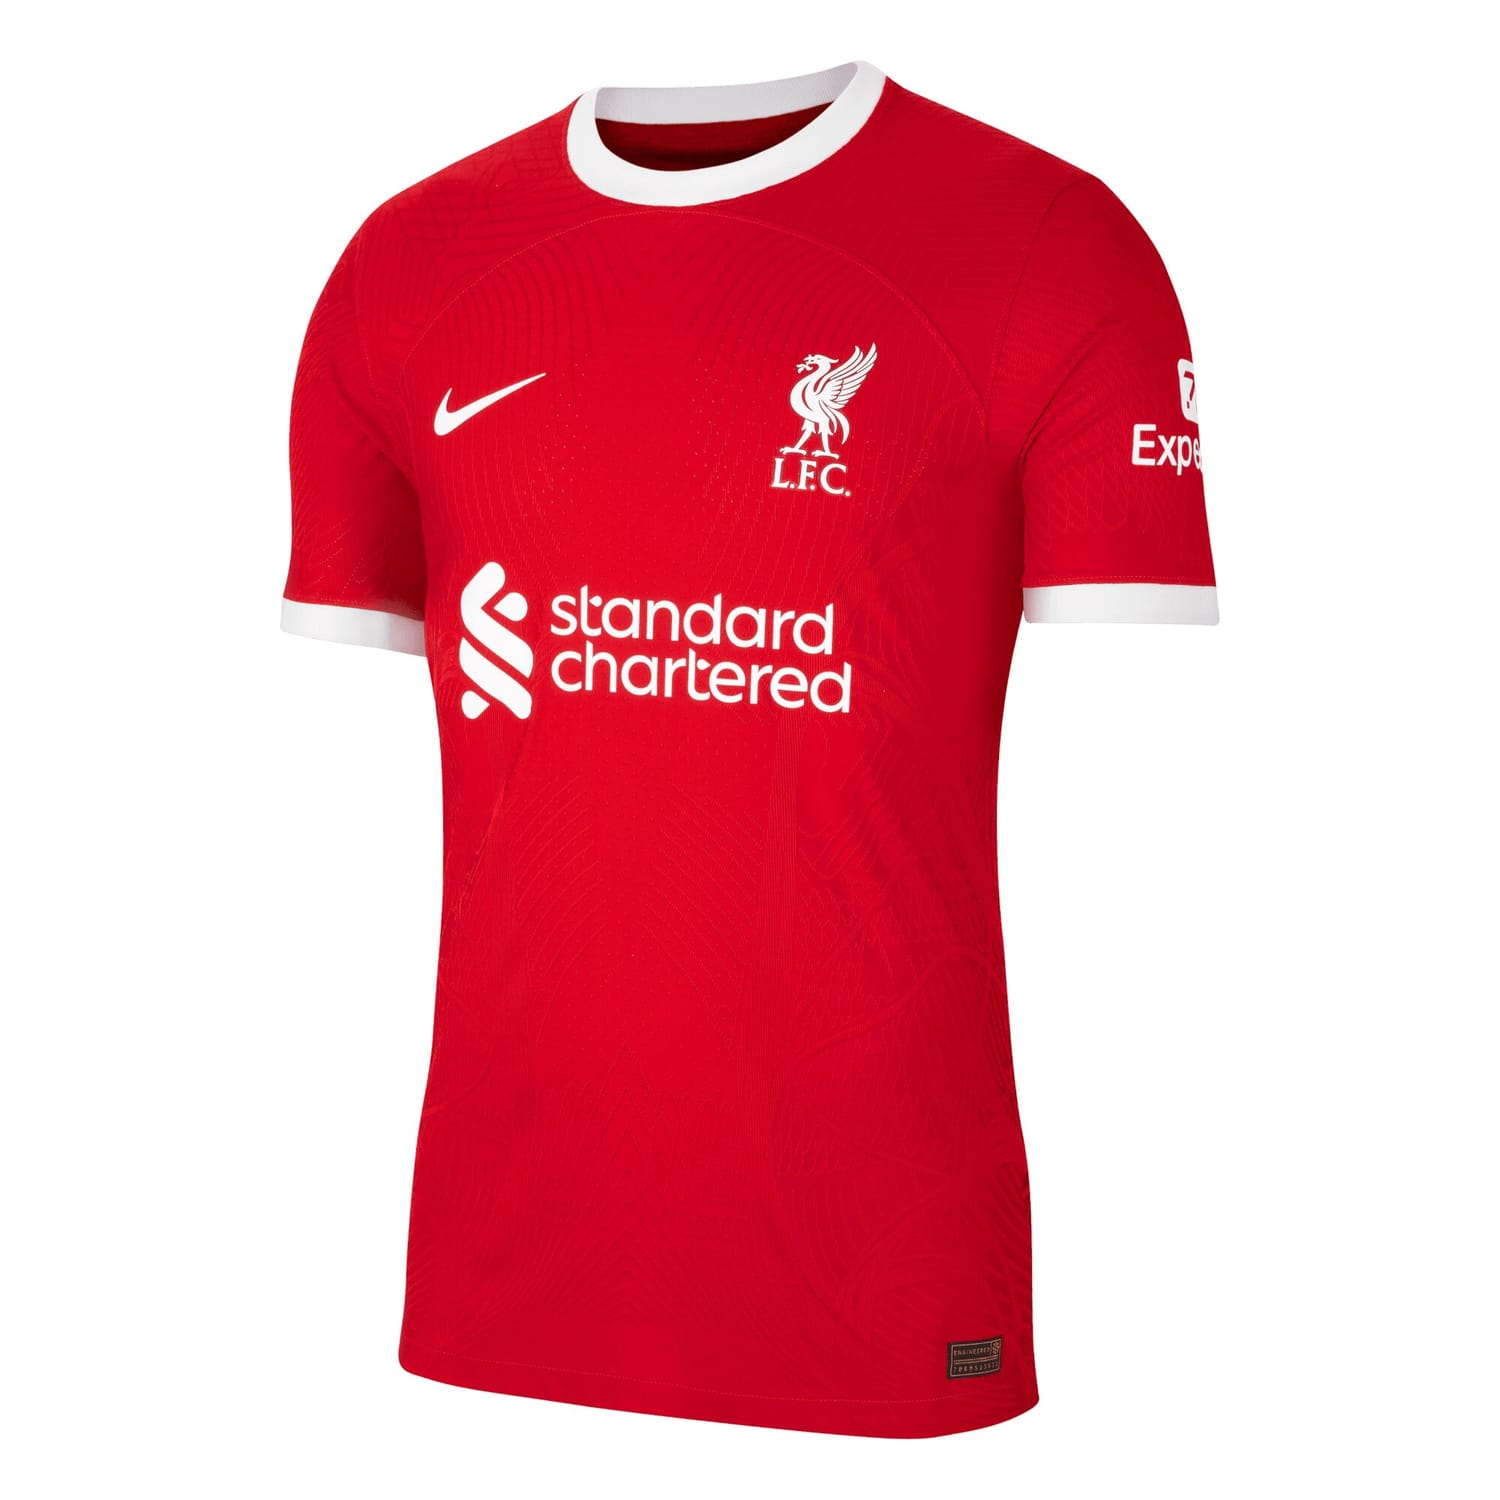 Premier League Liverpool Home Authentic Jersey Shirt 2023-24 player Mohamed Salah 11 printing for Men